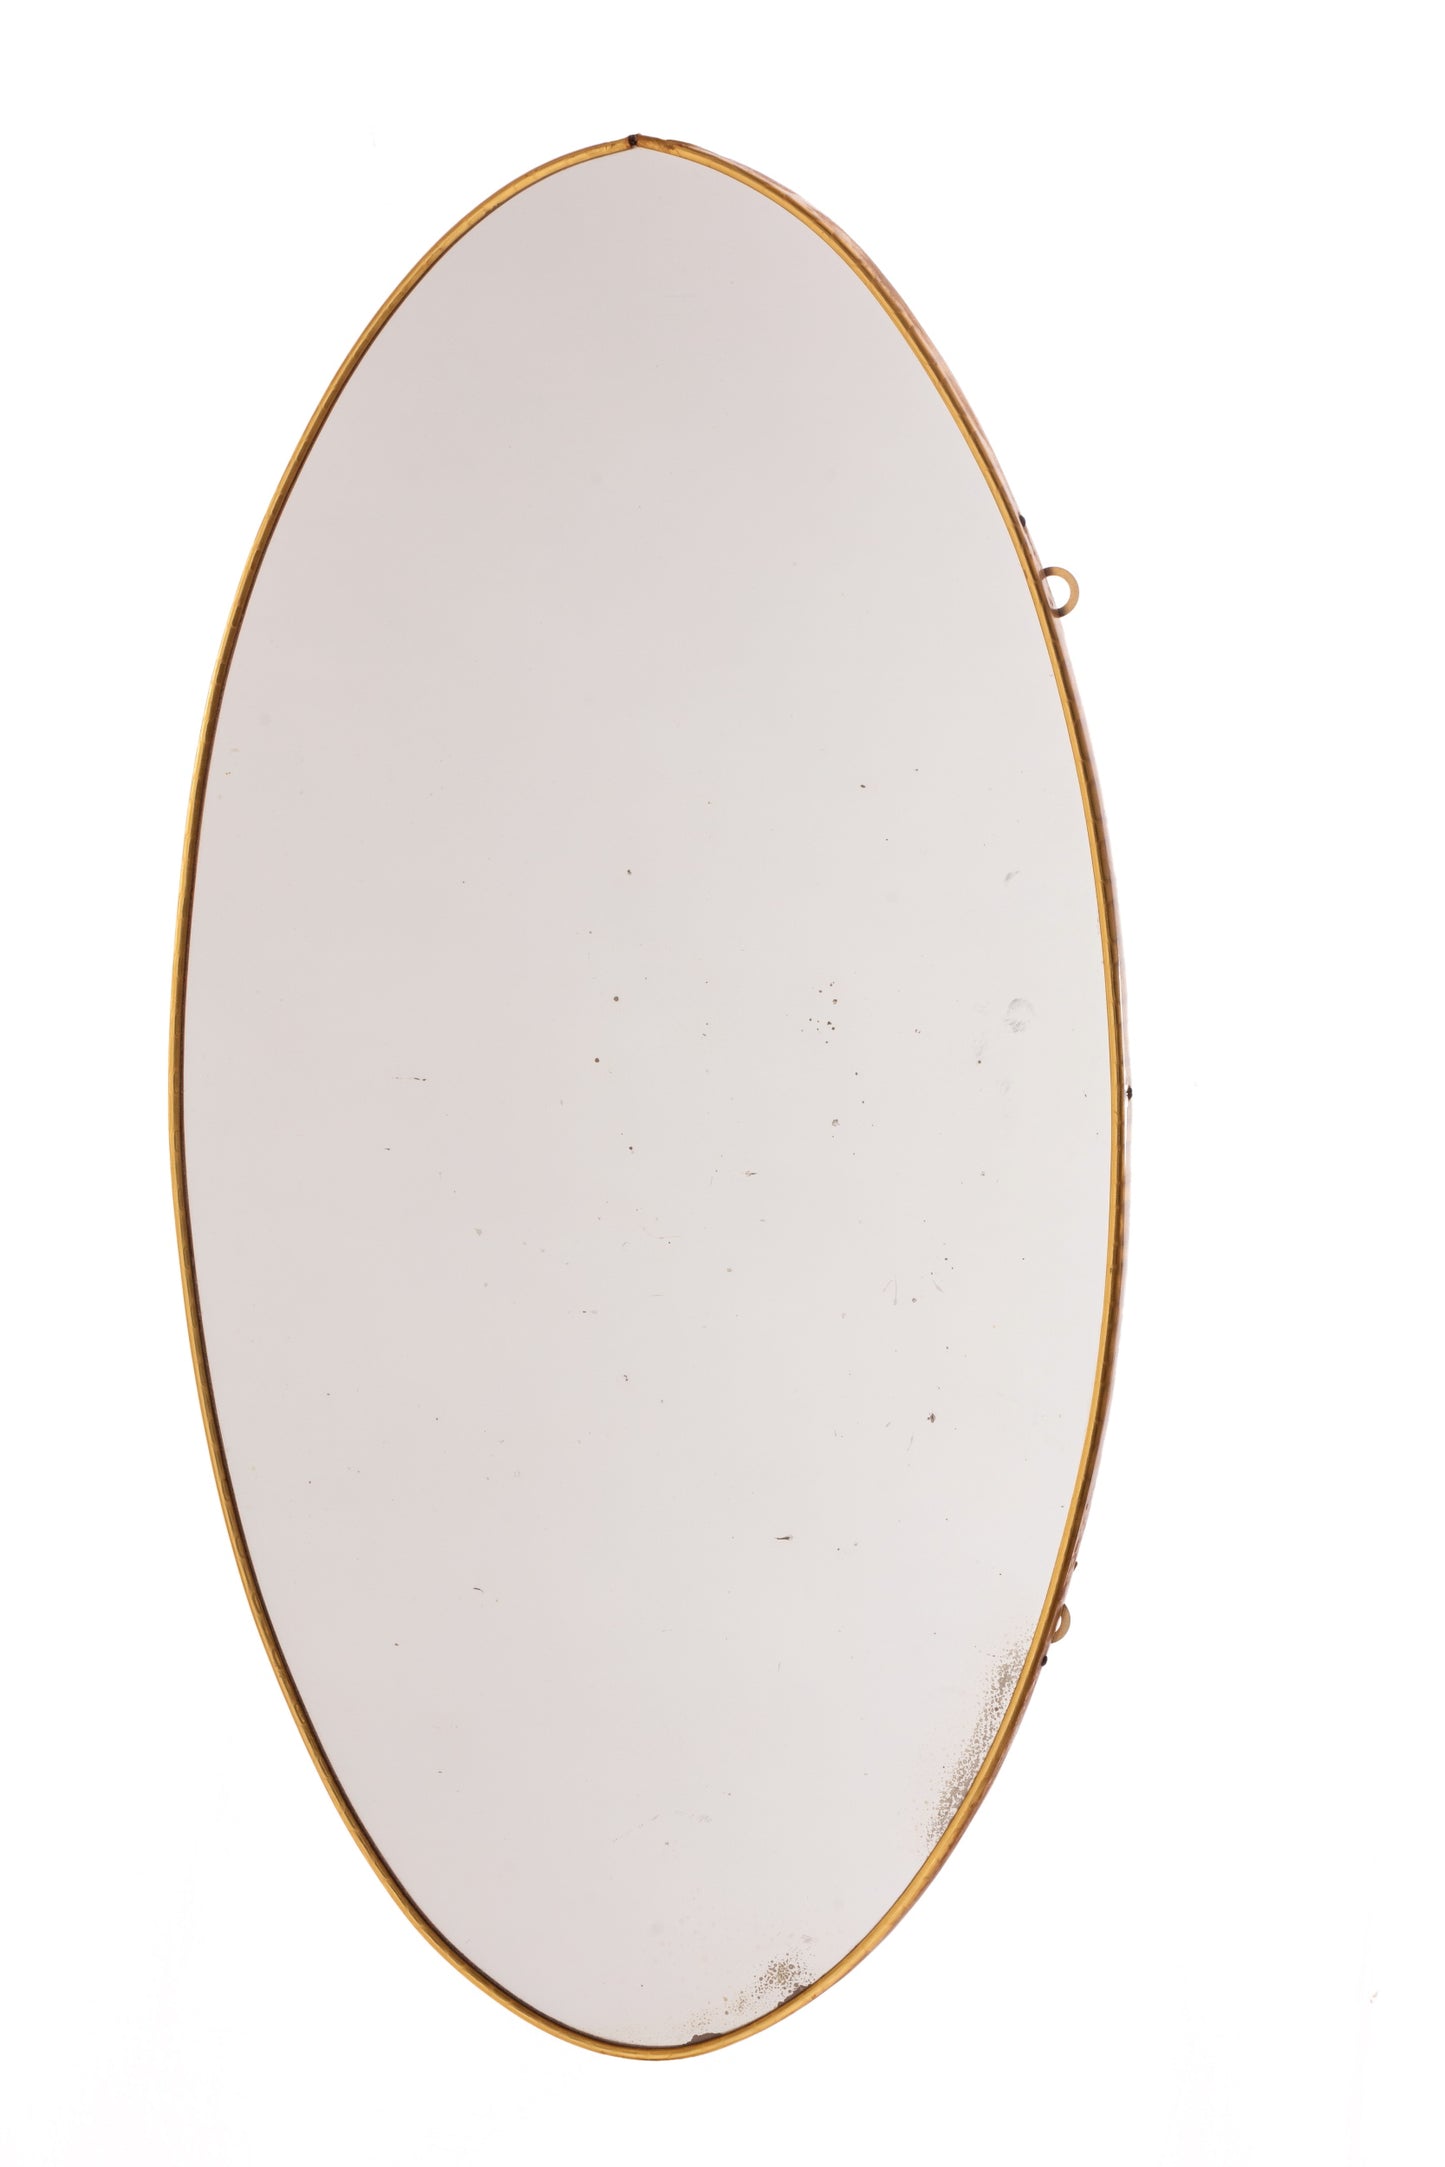 Oval mirror from the 1950s